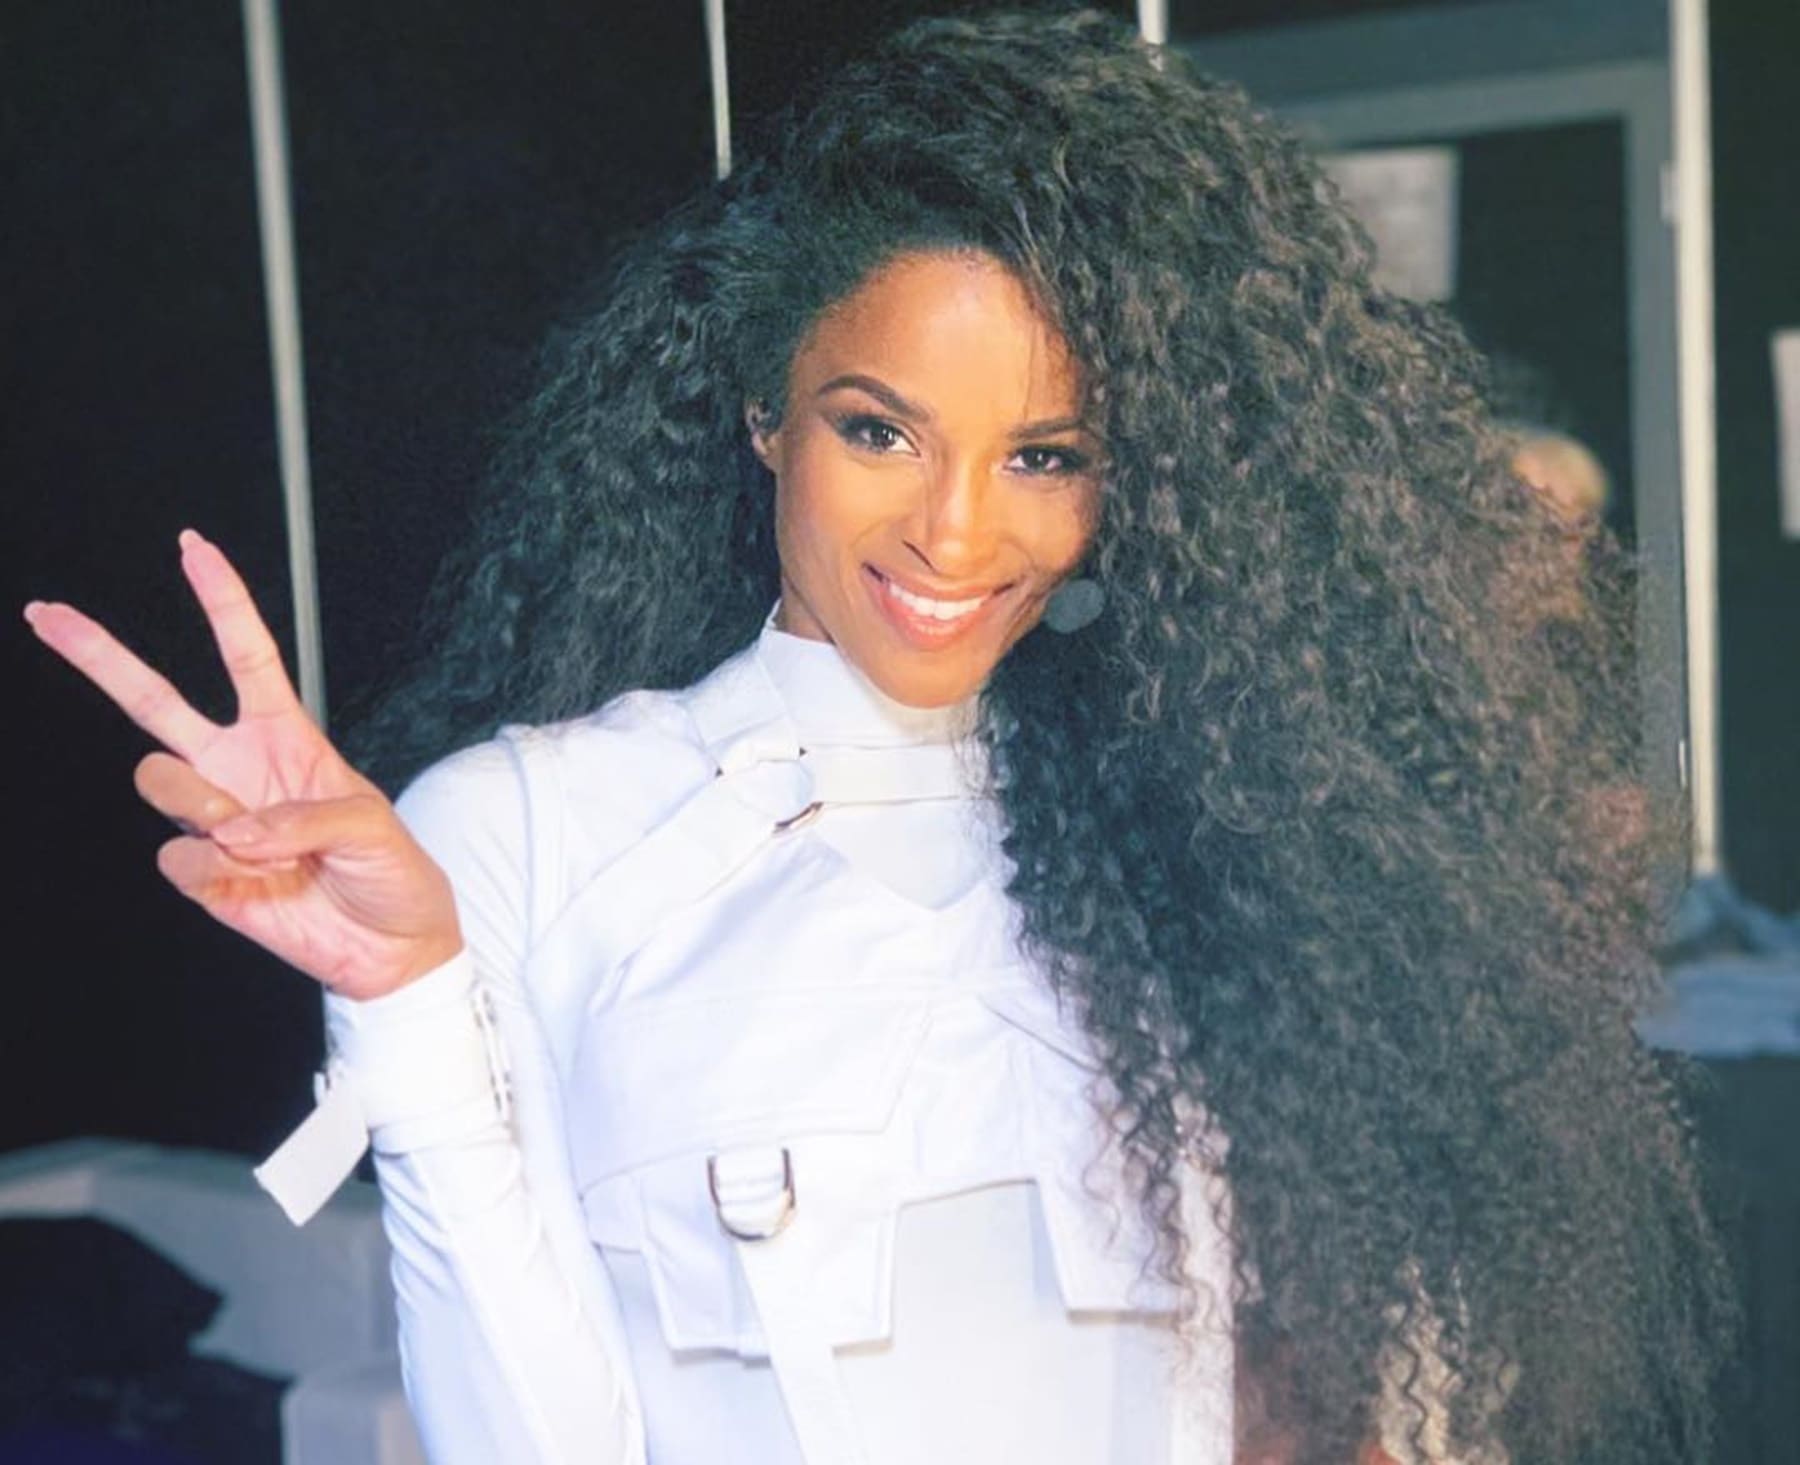 Ciara Leaves Little To The Imagination On The Cover Of ‘Beauty Marks’ Album ...